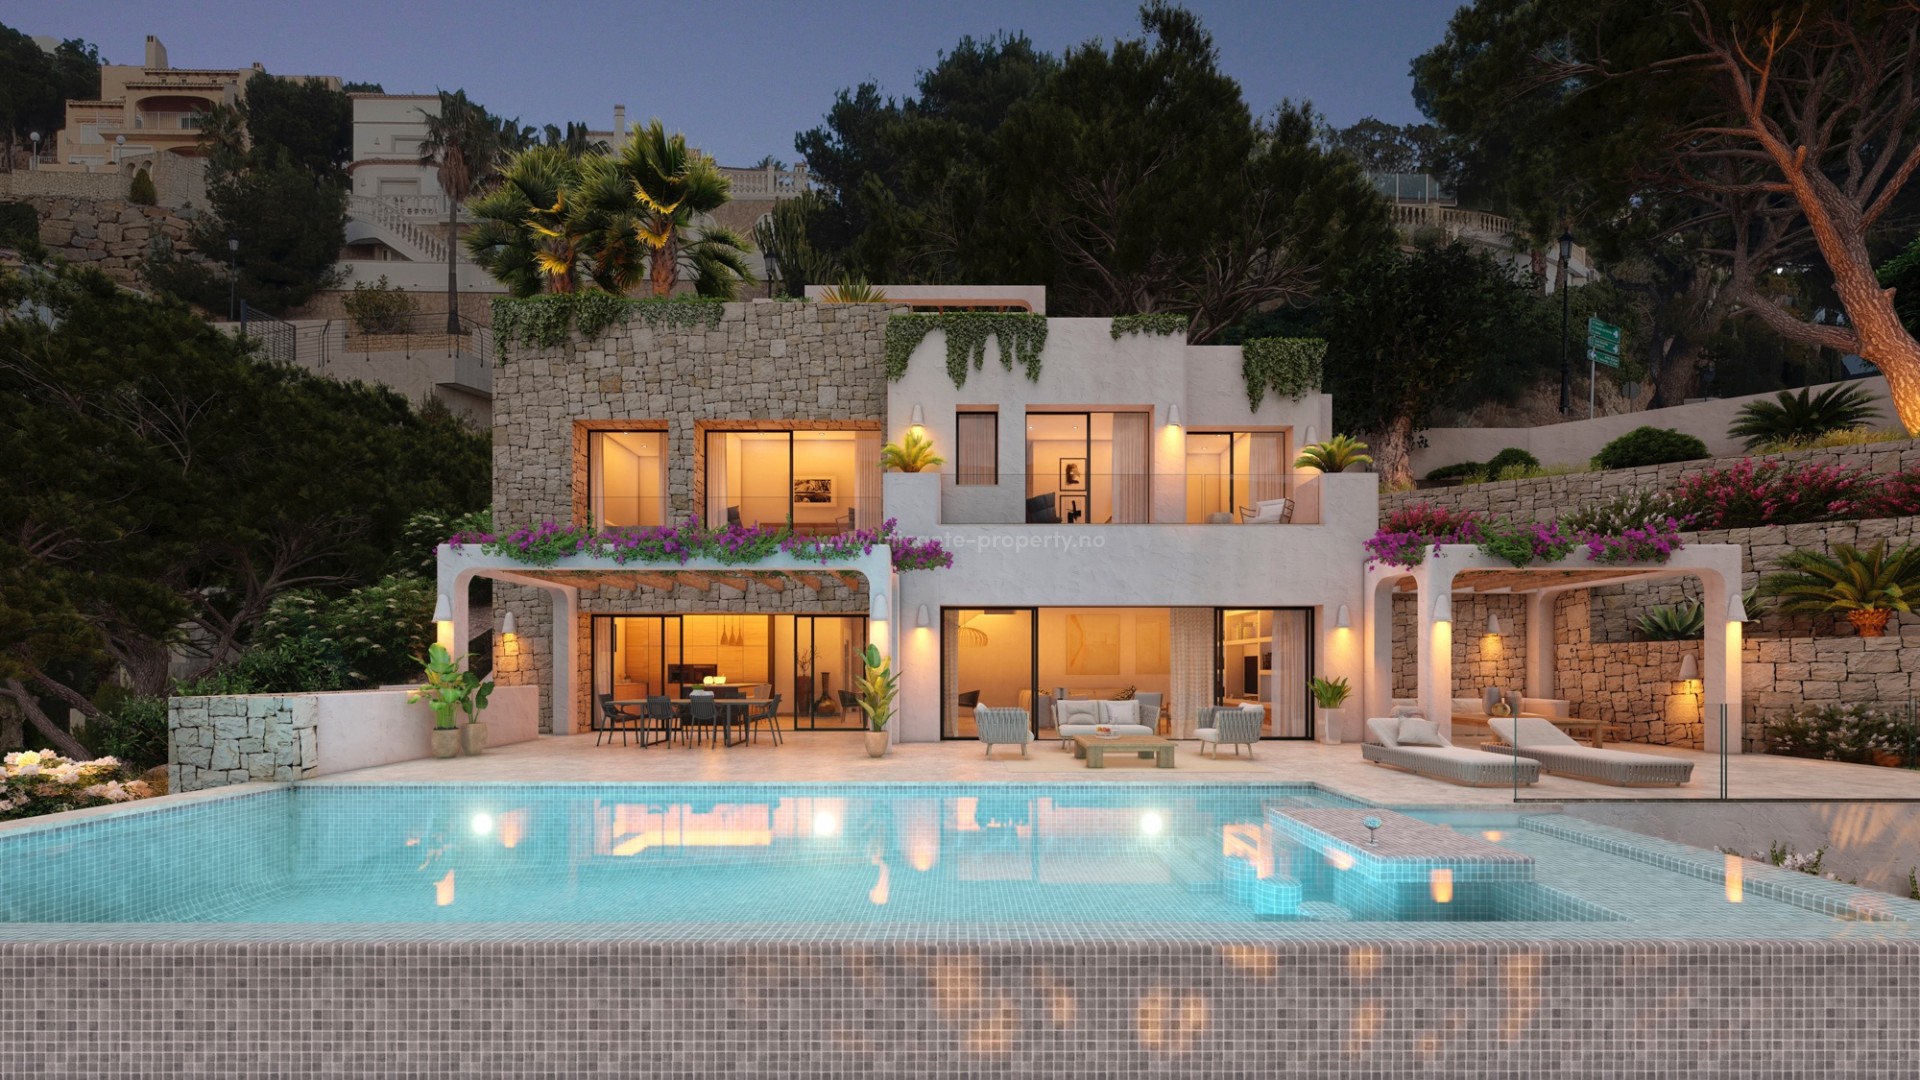 Modern luxury villa with incredible views in Altea Hills with 4 bedrooms and 4 bathrooms, infinity pool and several terraces. Parking for several cars